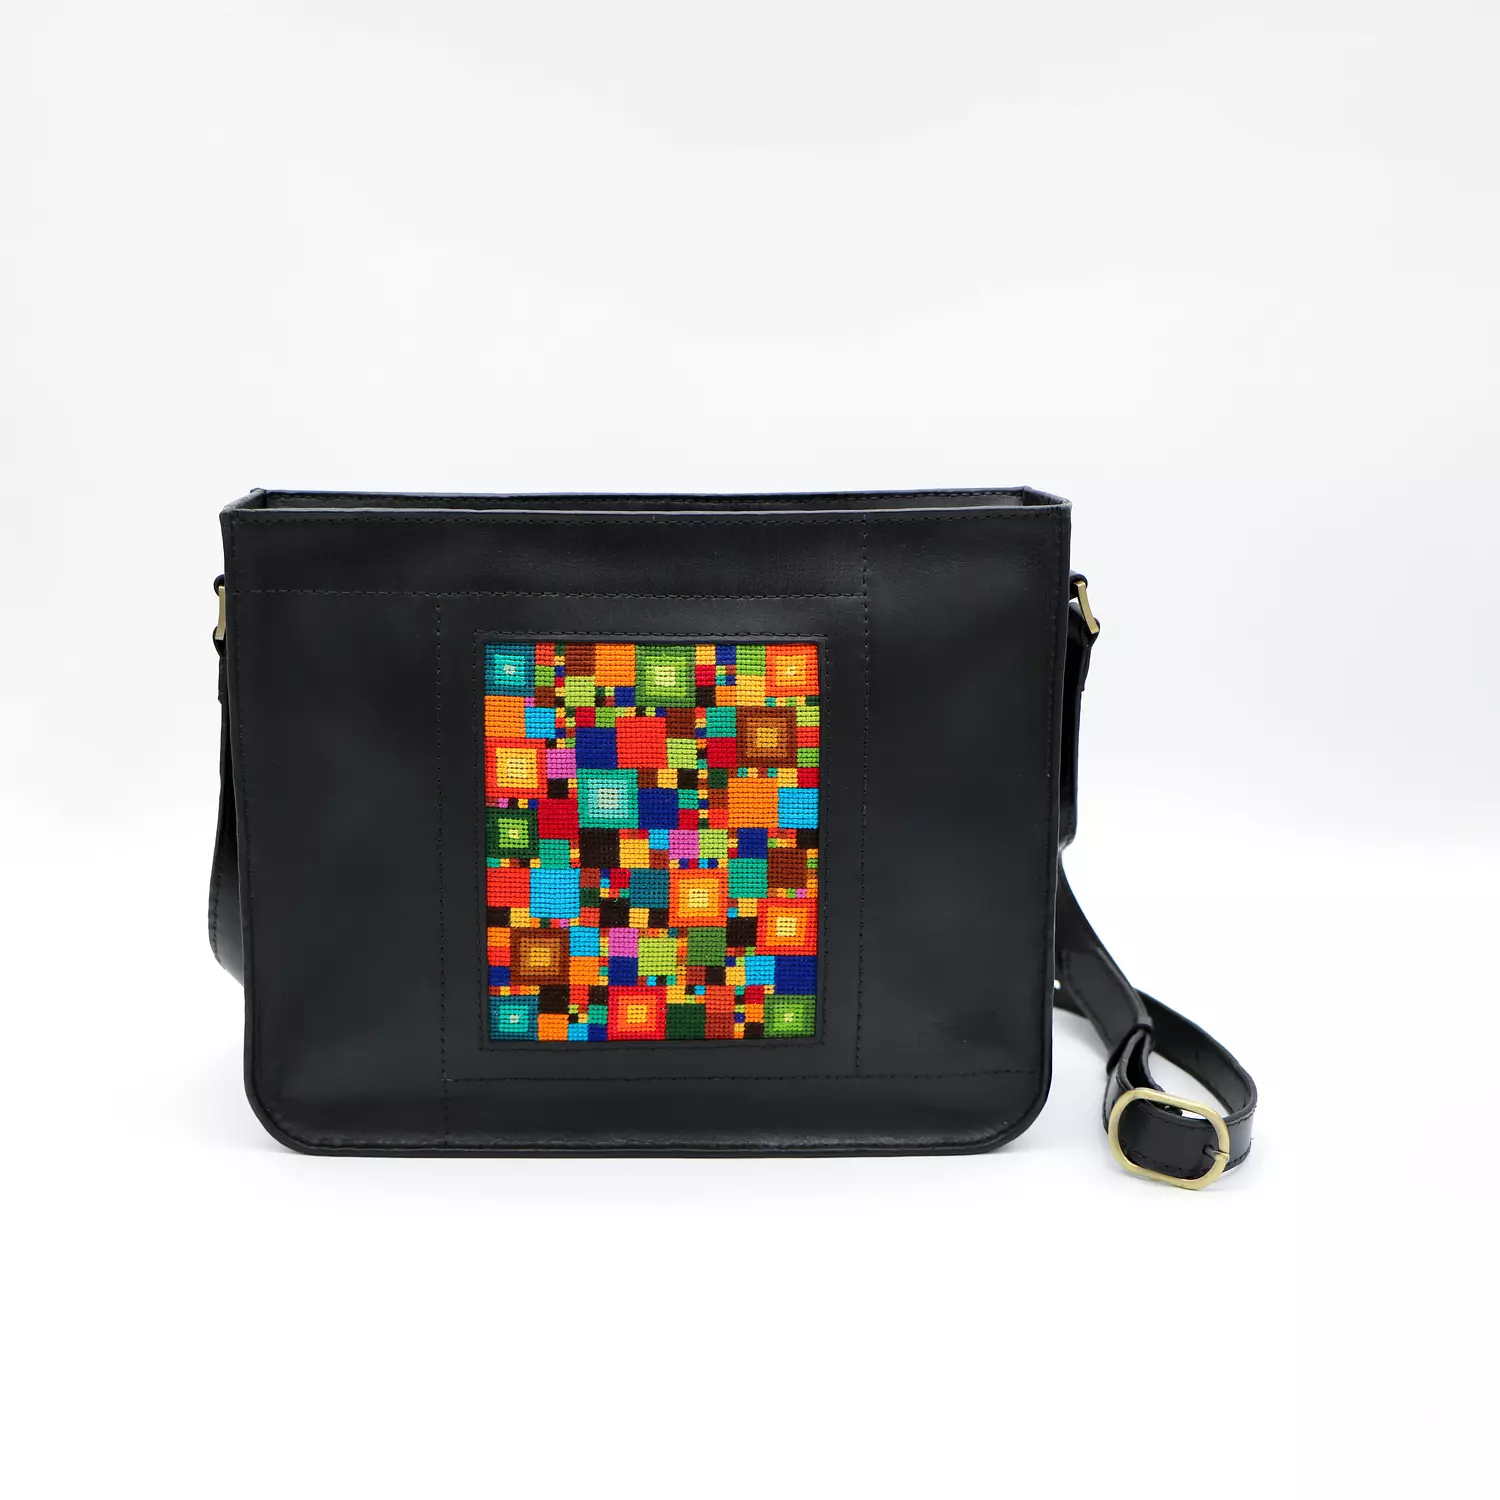 Genuine leather bag with colorful Cross-stitching. 0